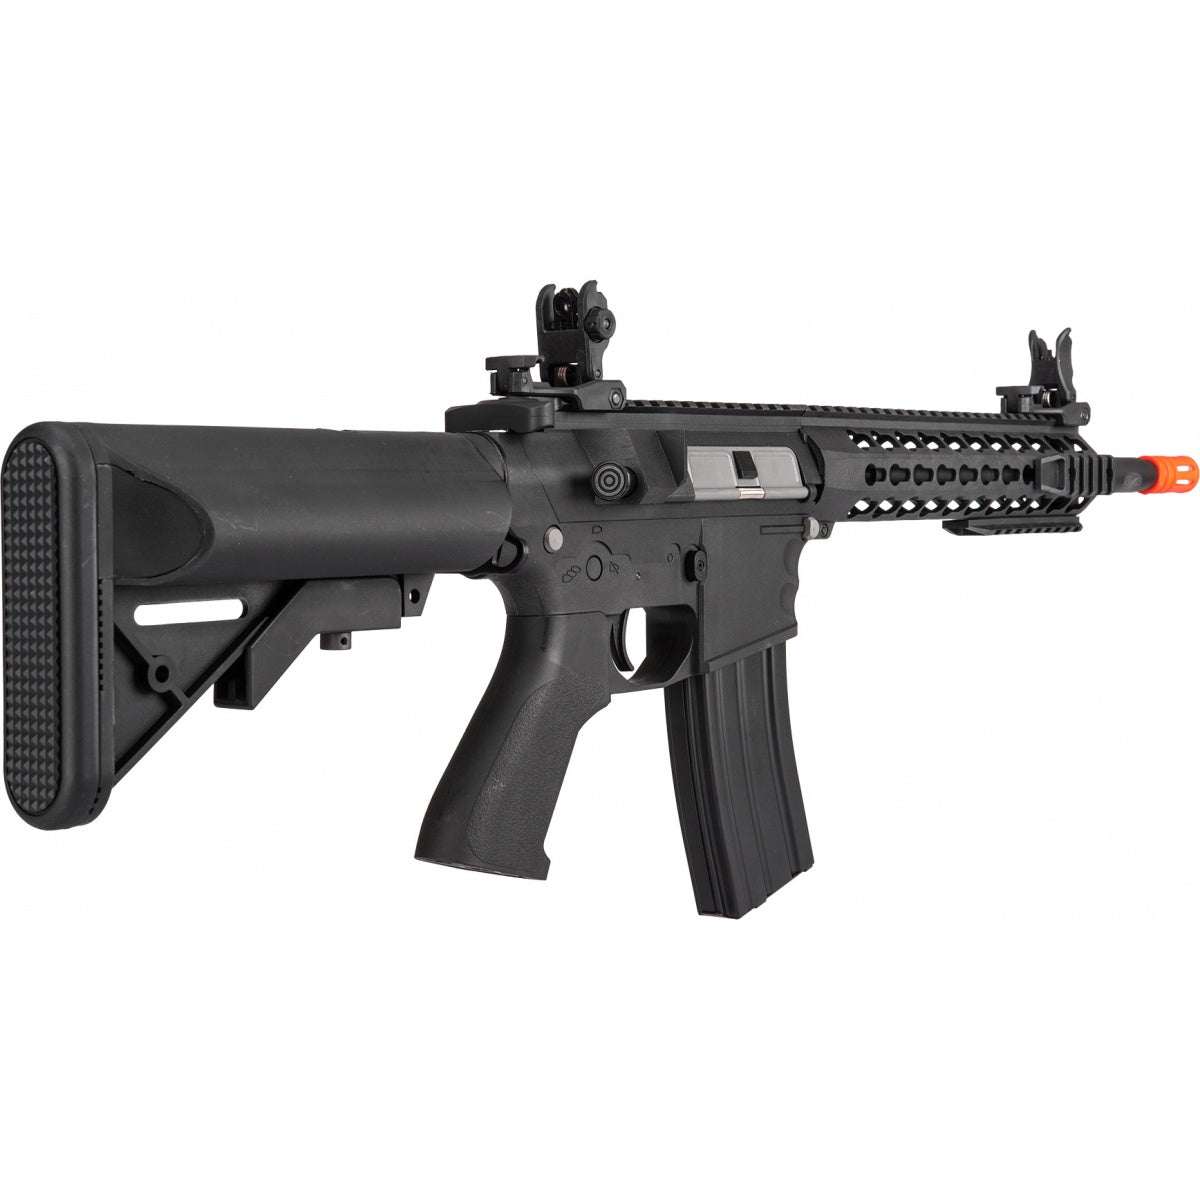 Lancer Tactical Gen 2 10"Keymod M4 Evo AEG Airsoft Rifle Battery and Charger Included - ssairsoft.com